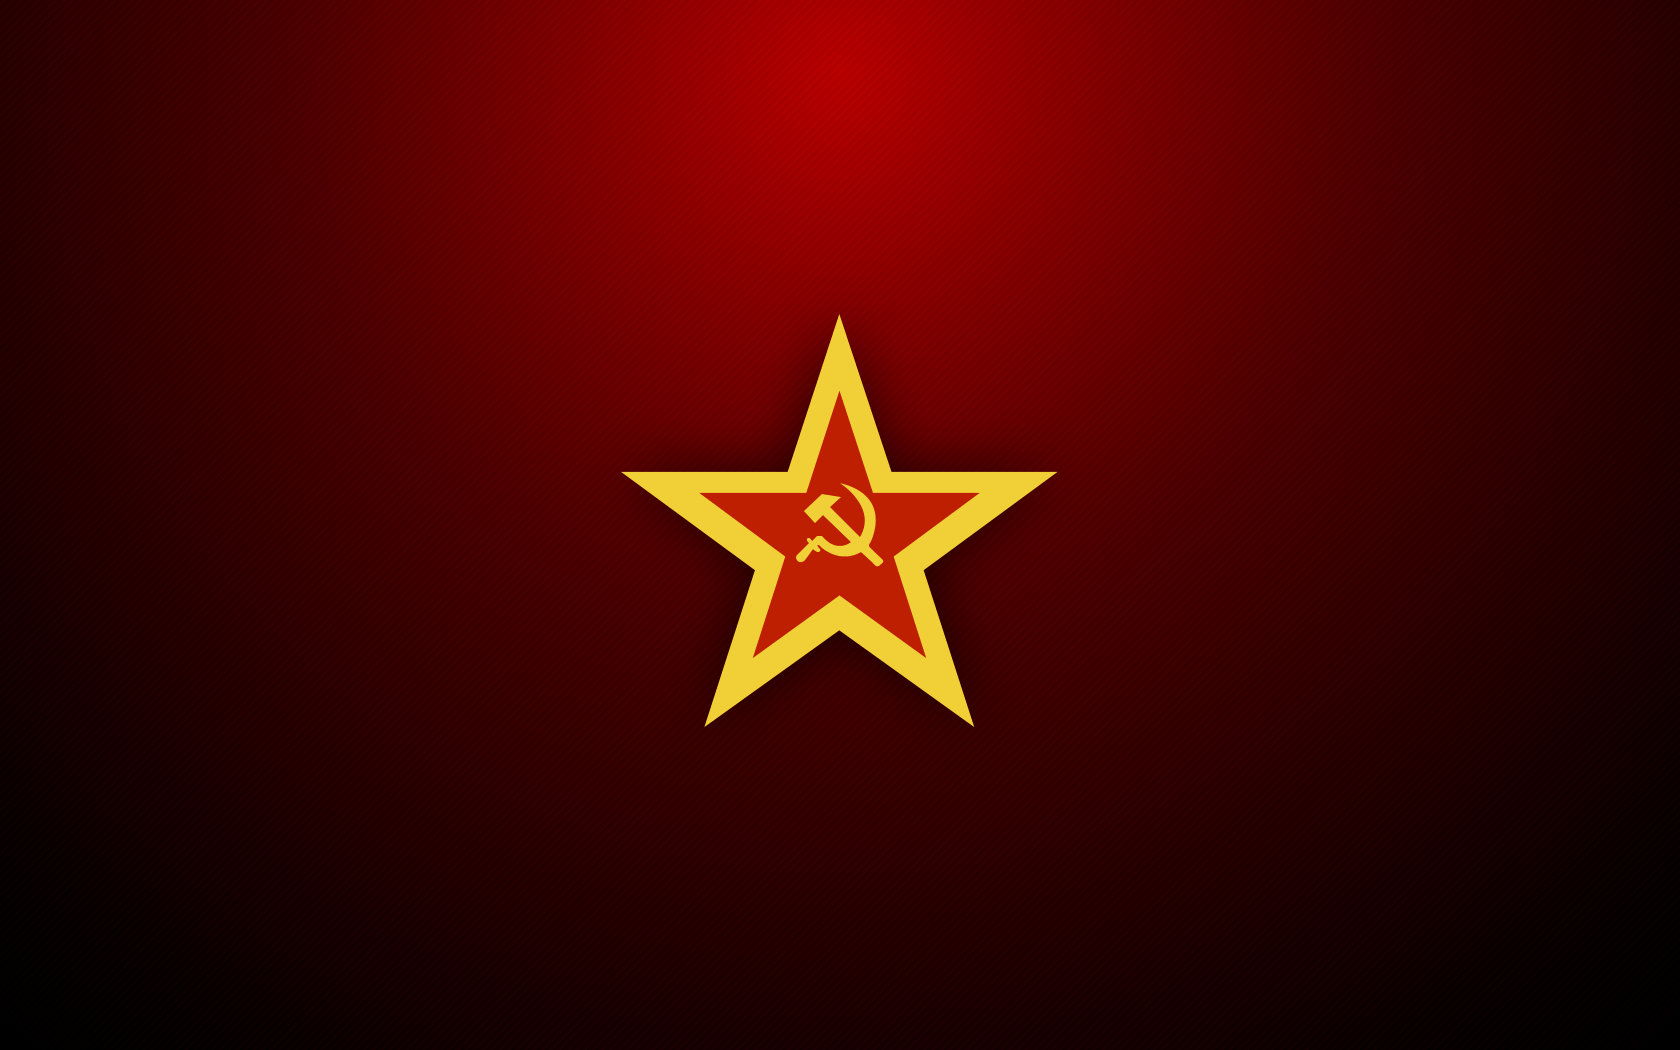 Wallpaper For > Communism Its A Party Wallpaper